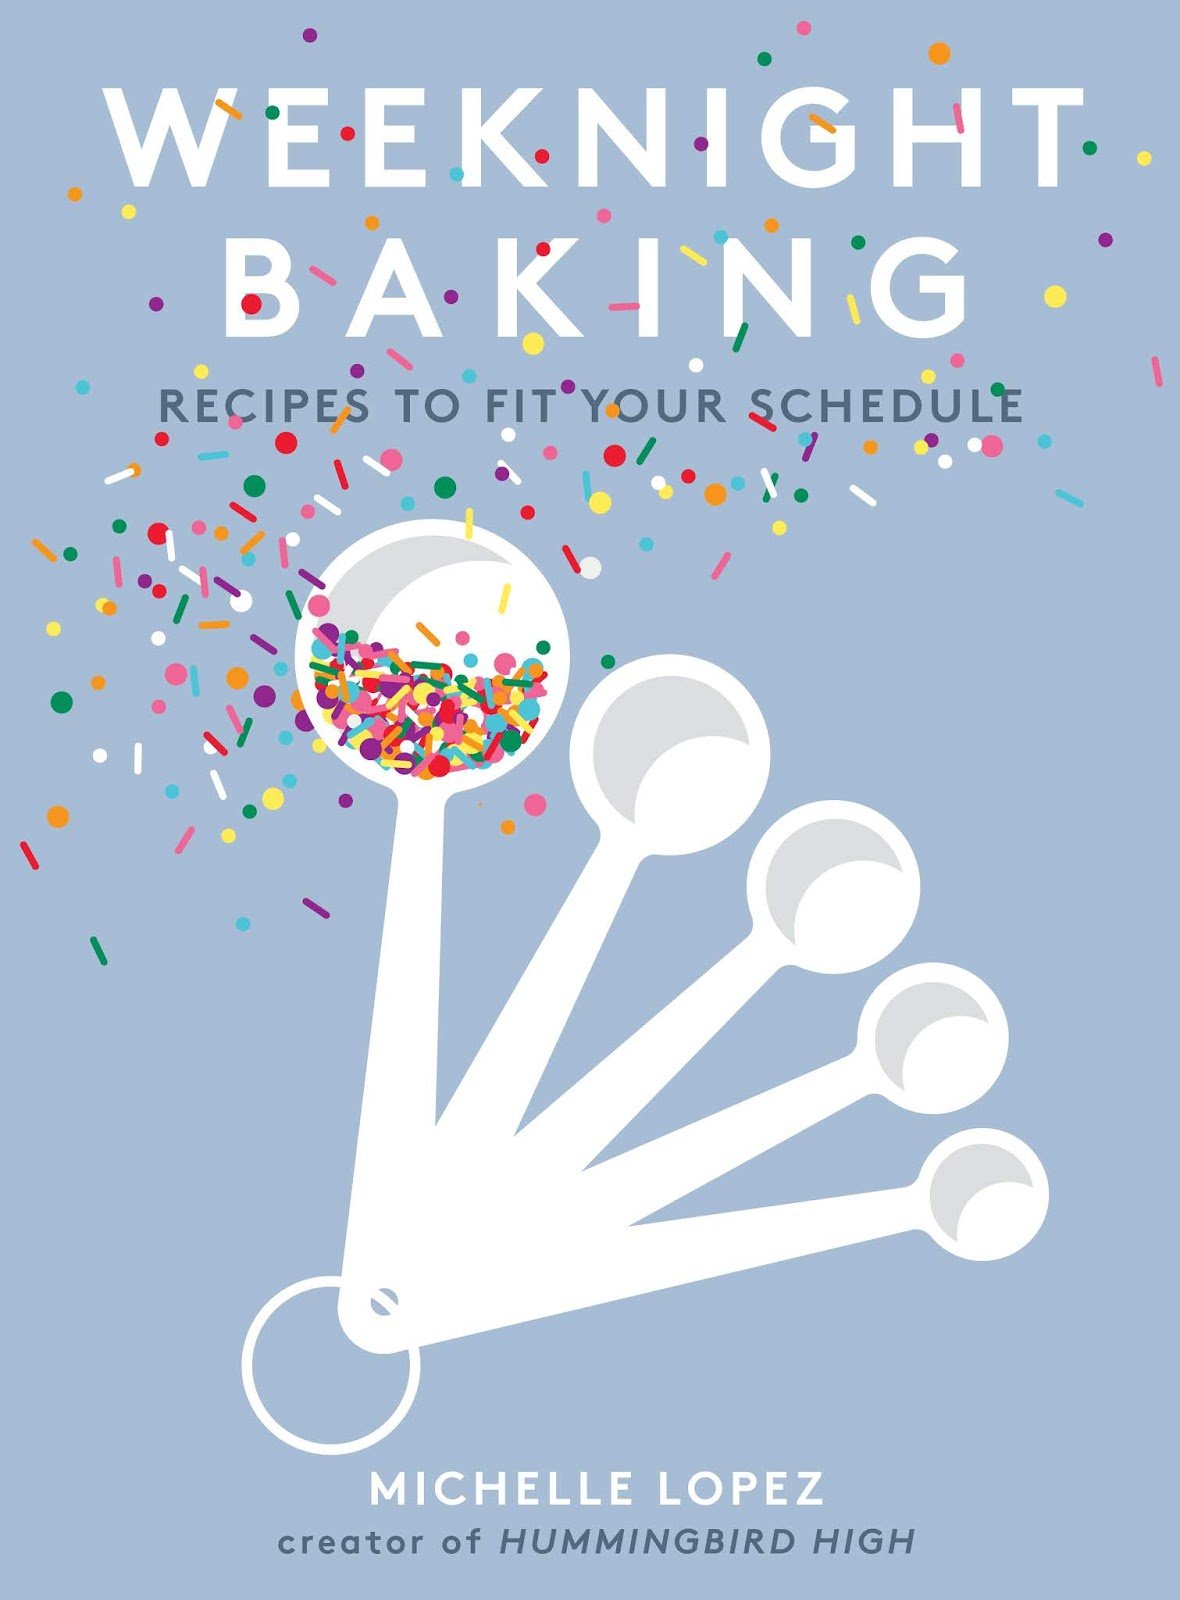 how to write a cookbook: designing the front cover of